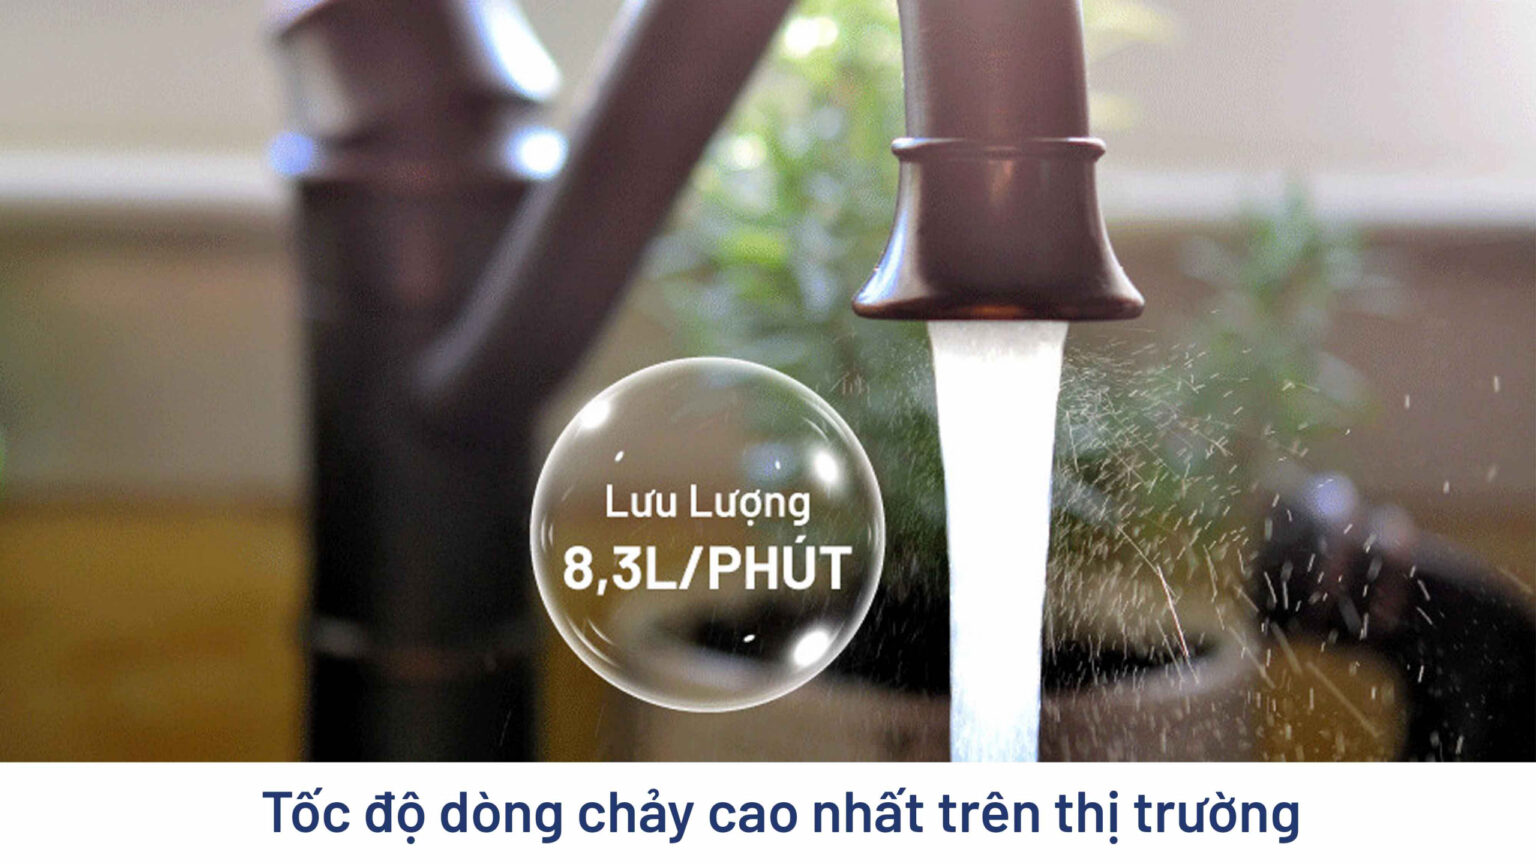 toc-do-dong-chay-cao-nhat-tren-thi-truong